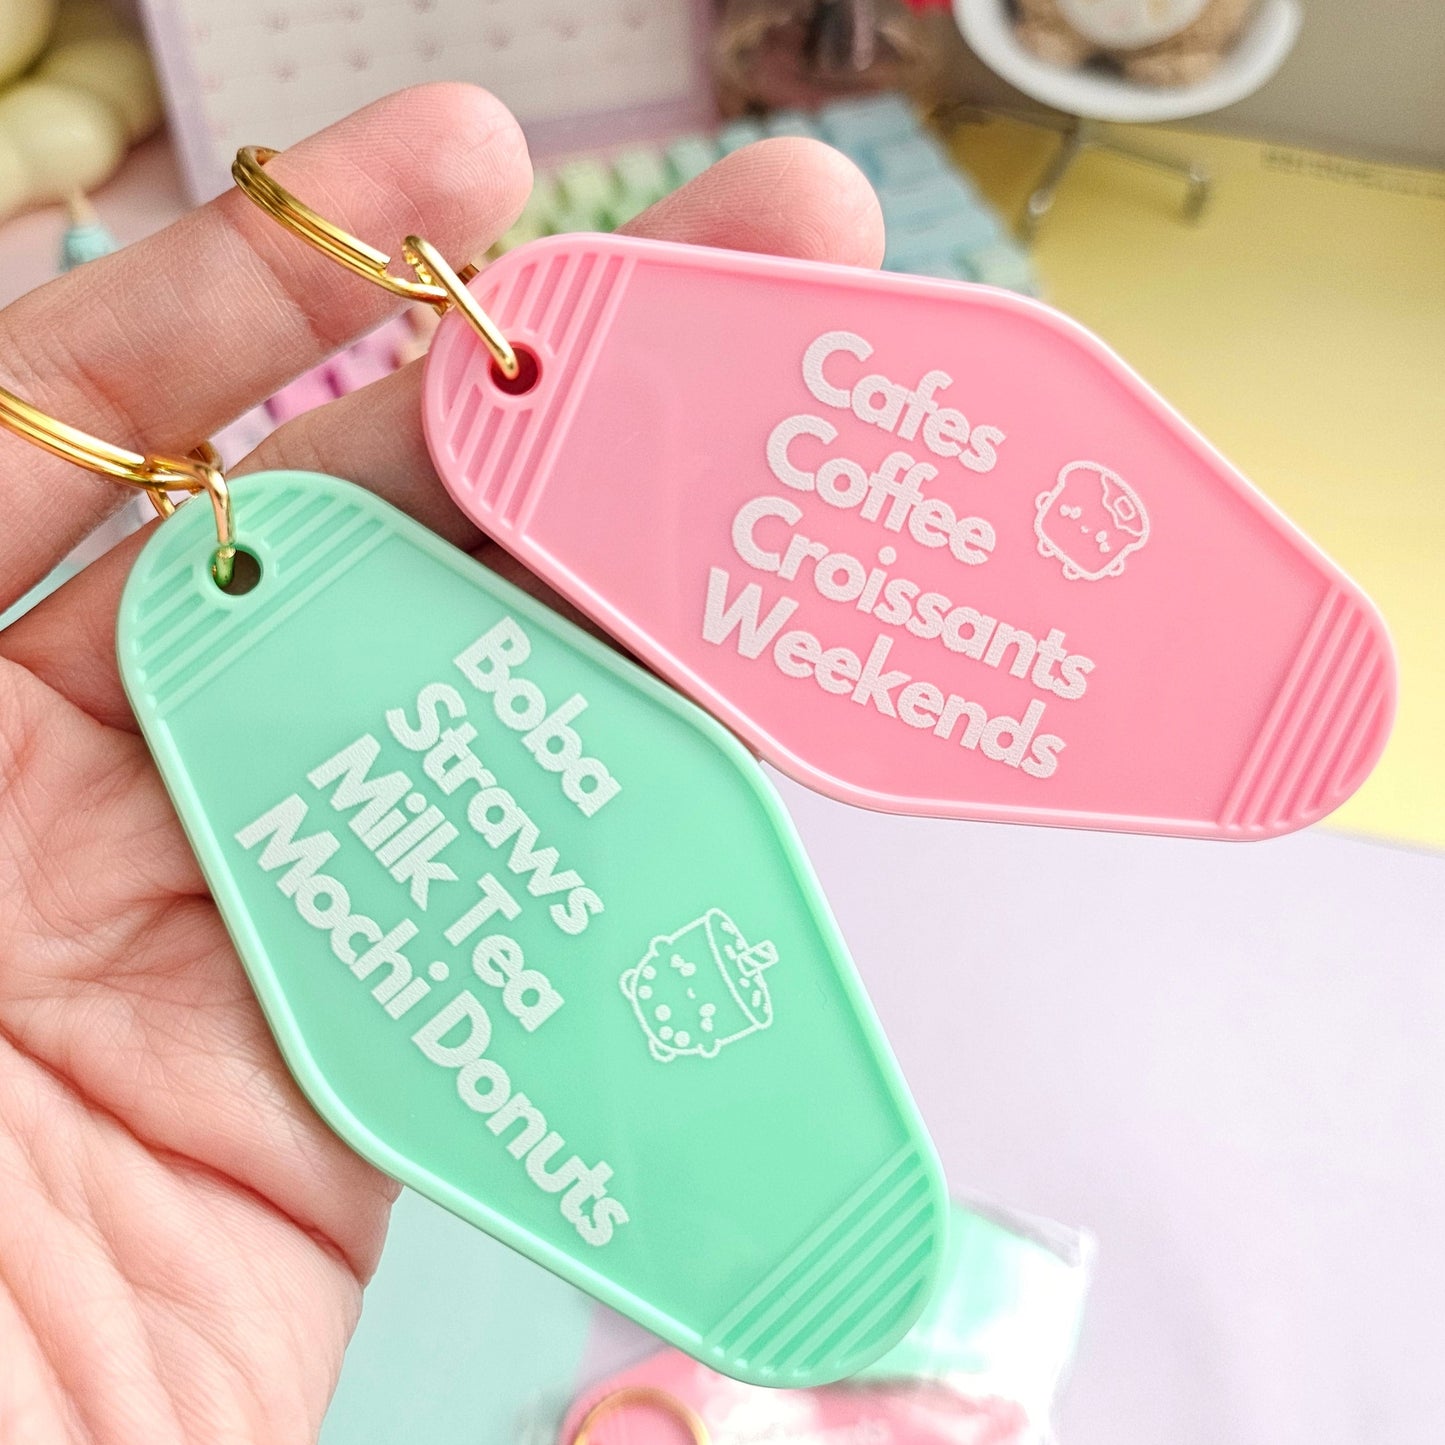 Coffee, Cafes, Croissants, & Weekends  Motel Keychain